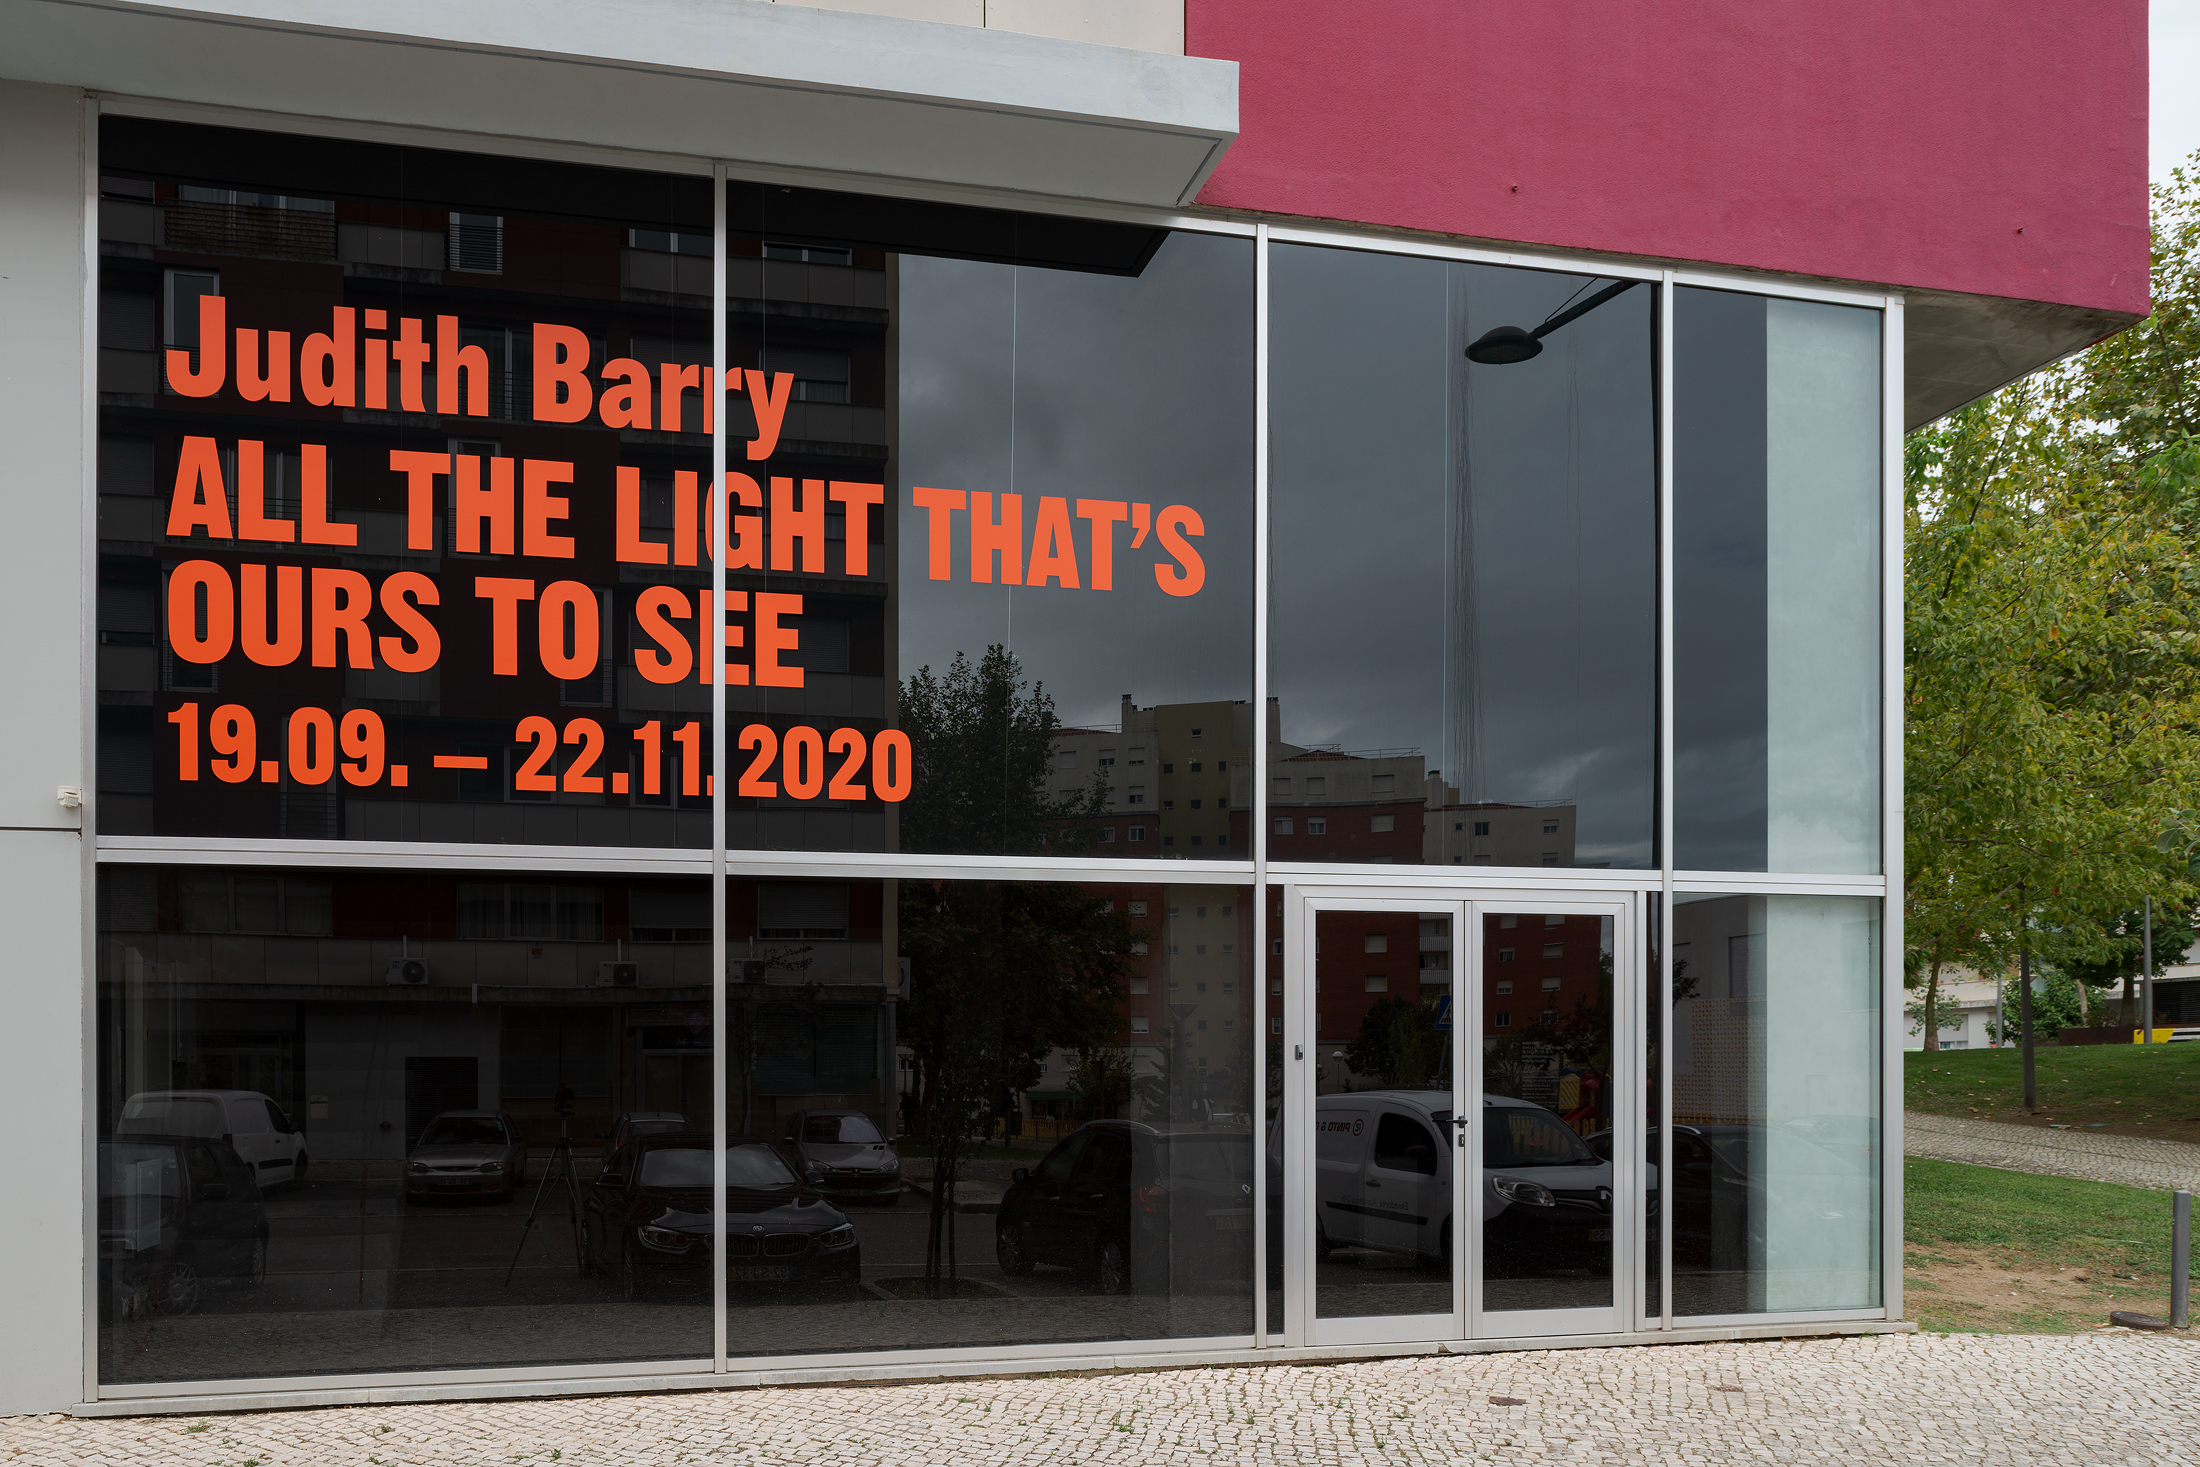 Judith Barry, All the light that's ours to see. Lumiar Cité, 2020.